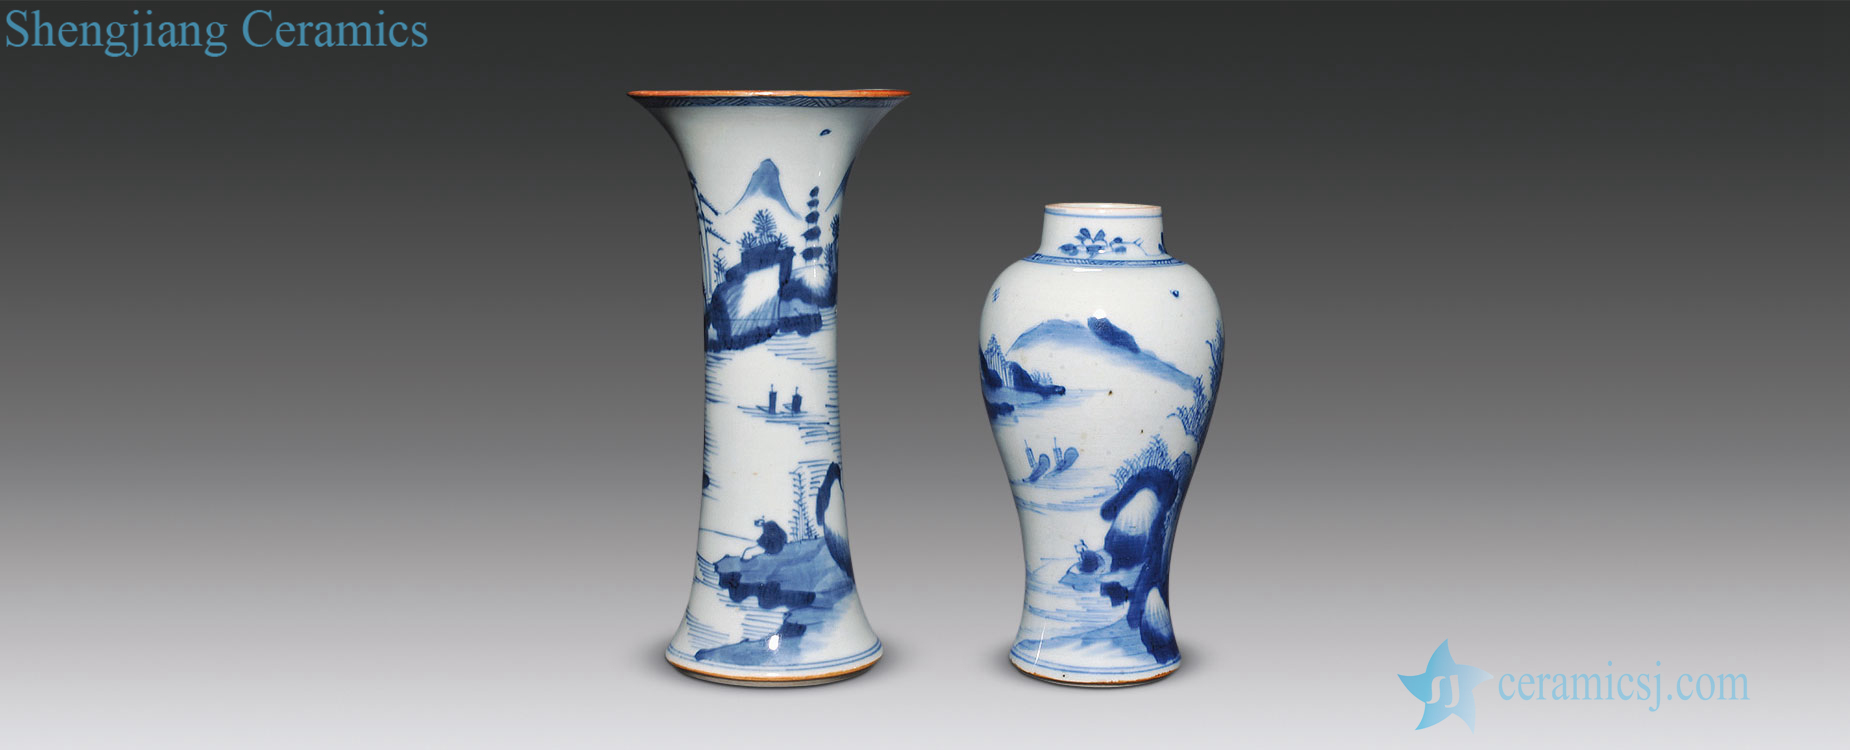 In the early qing Blue and white landscape character flower vase with grain, mei bottles of each one